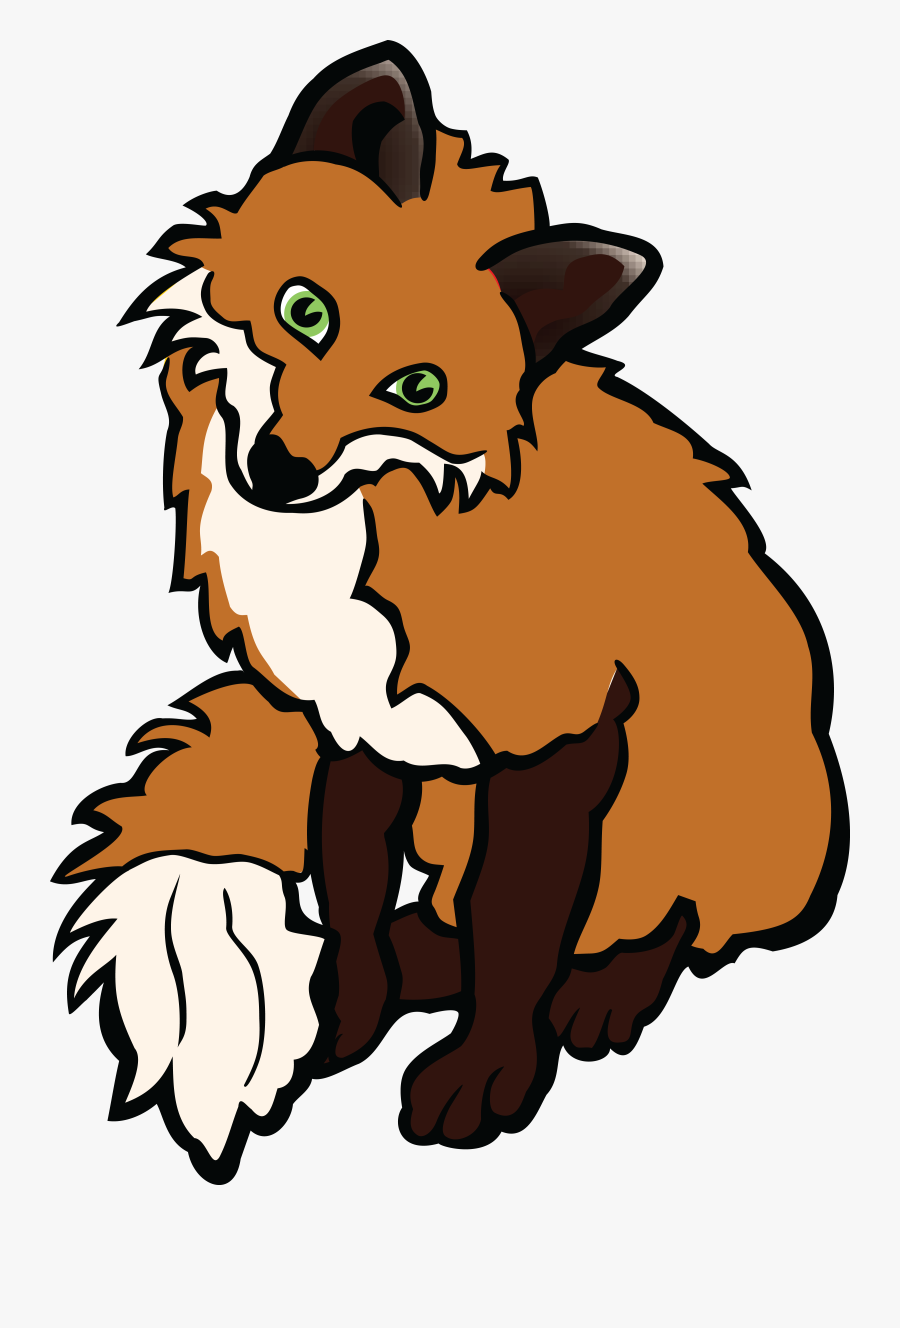 Free Clipart Of A Fox - Clip Art Of Fox Black And White, Transparent Clipart